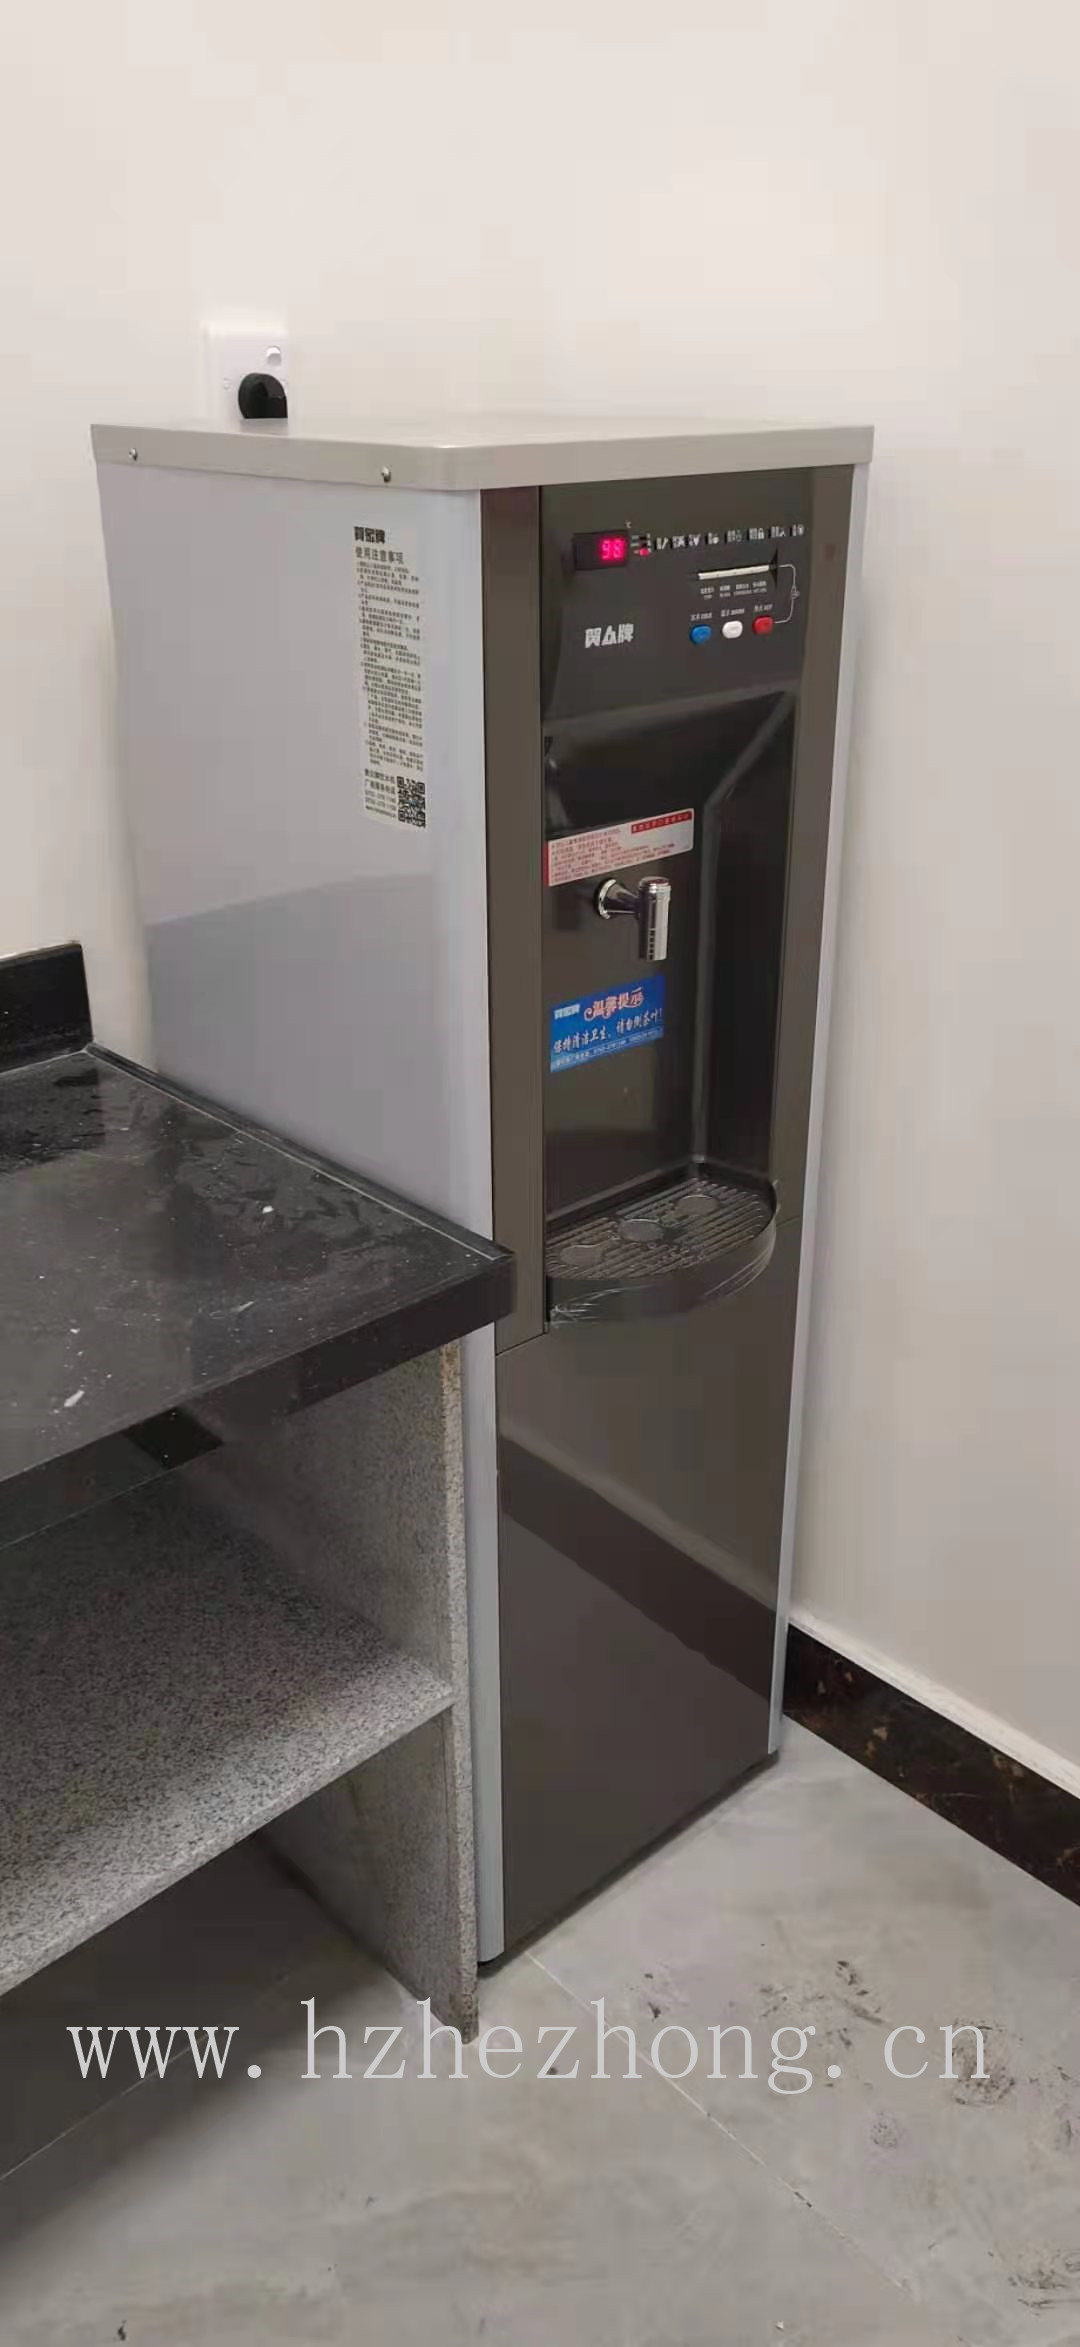 Global Foxconn chose ACUO brand water dispenser